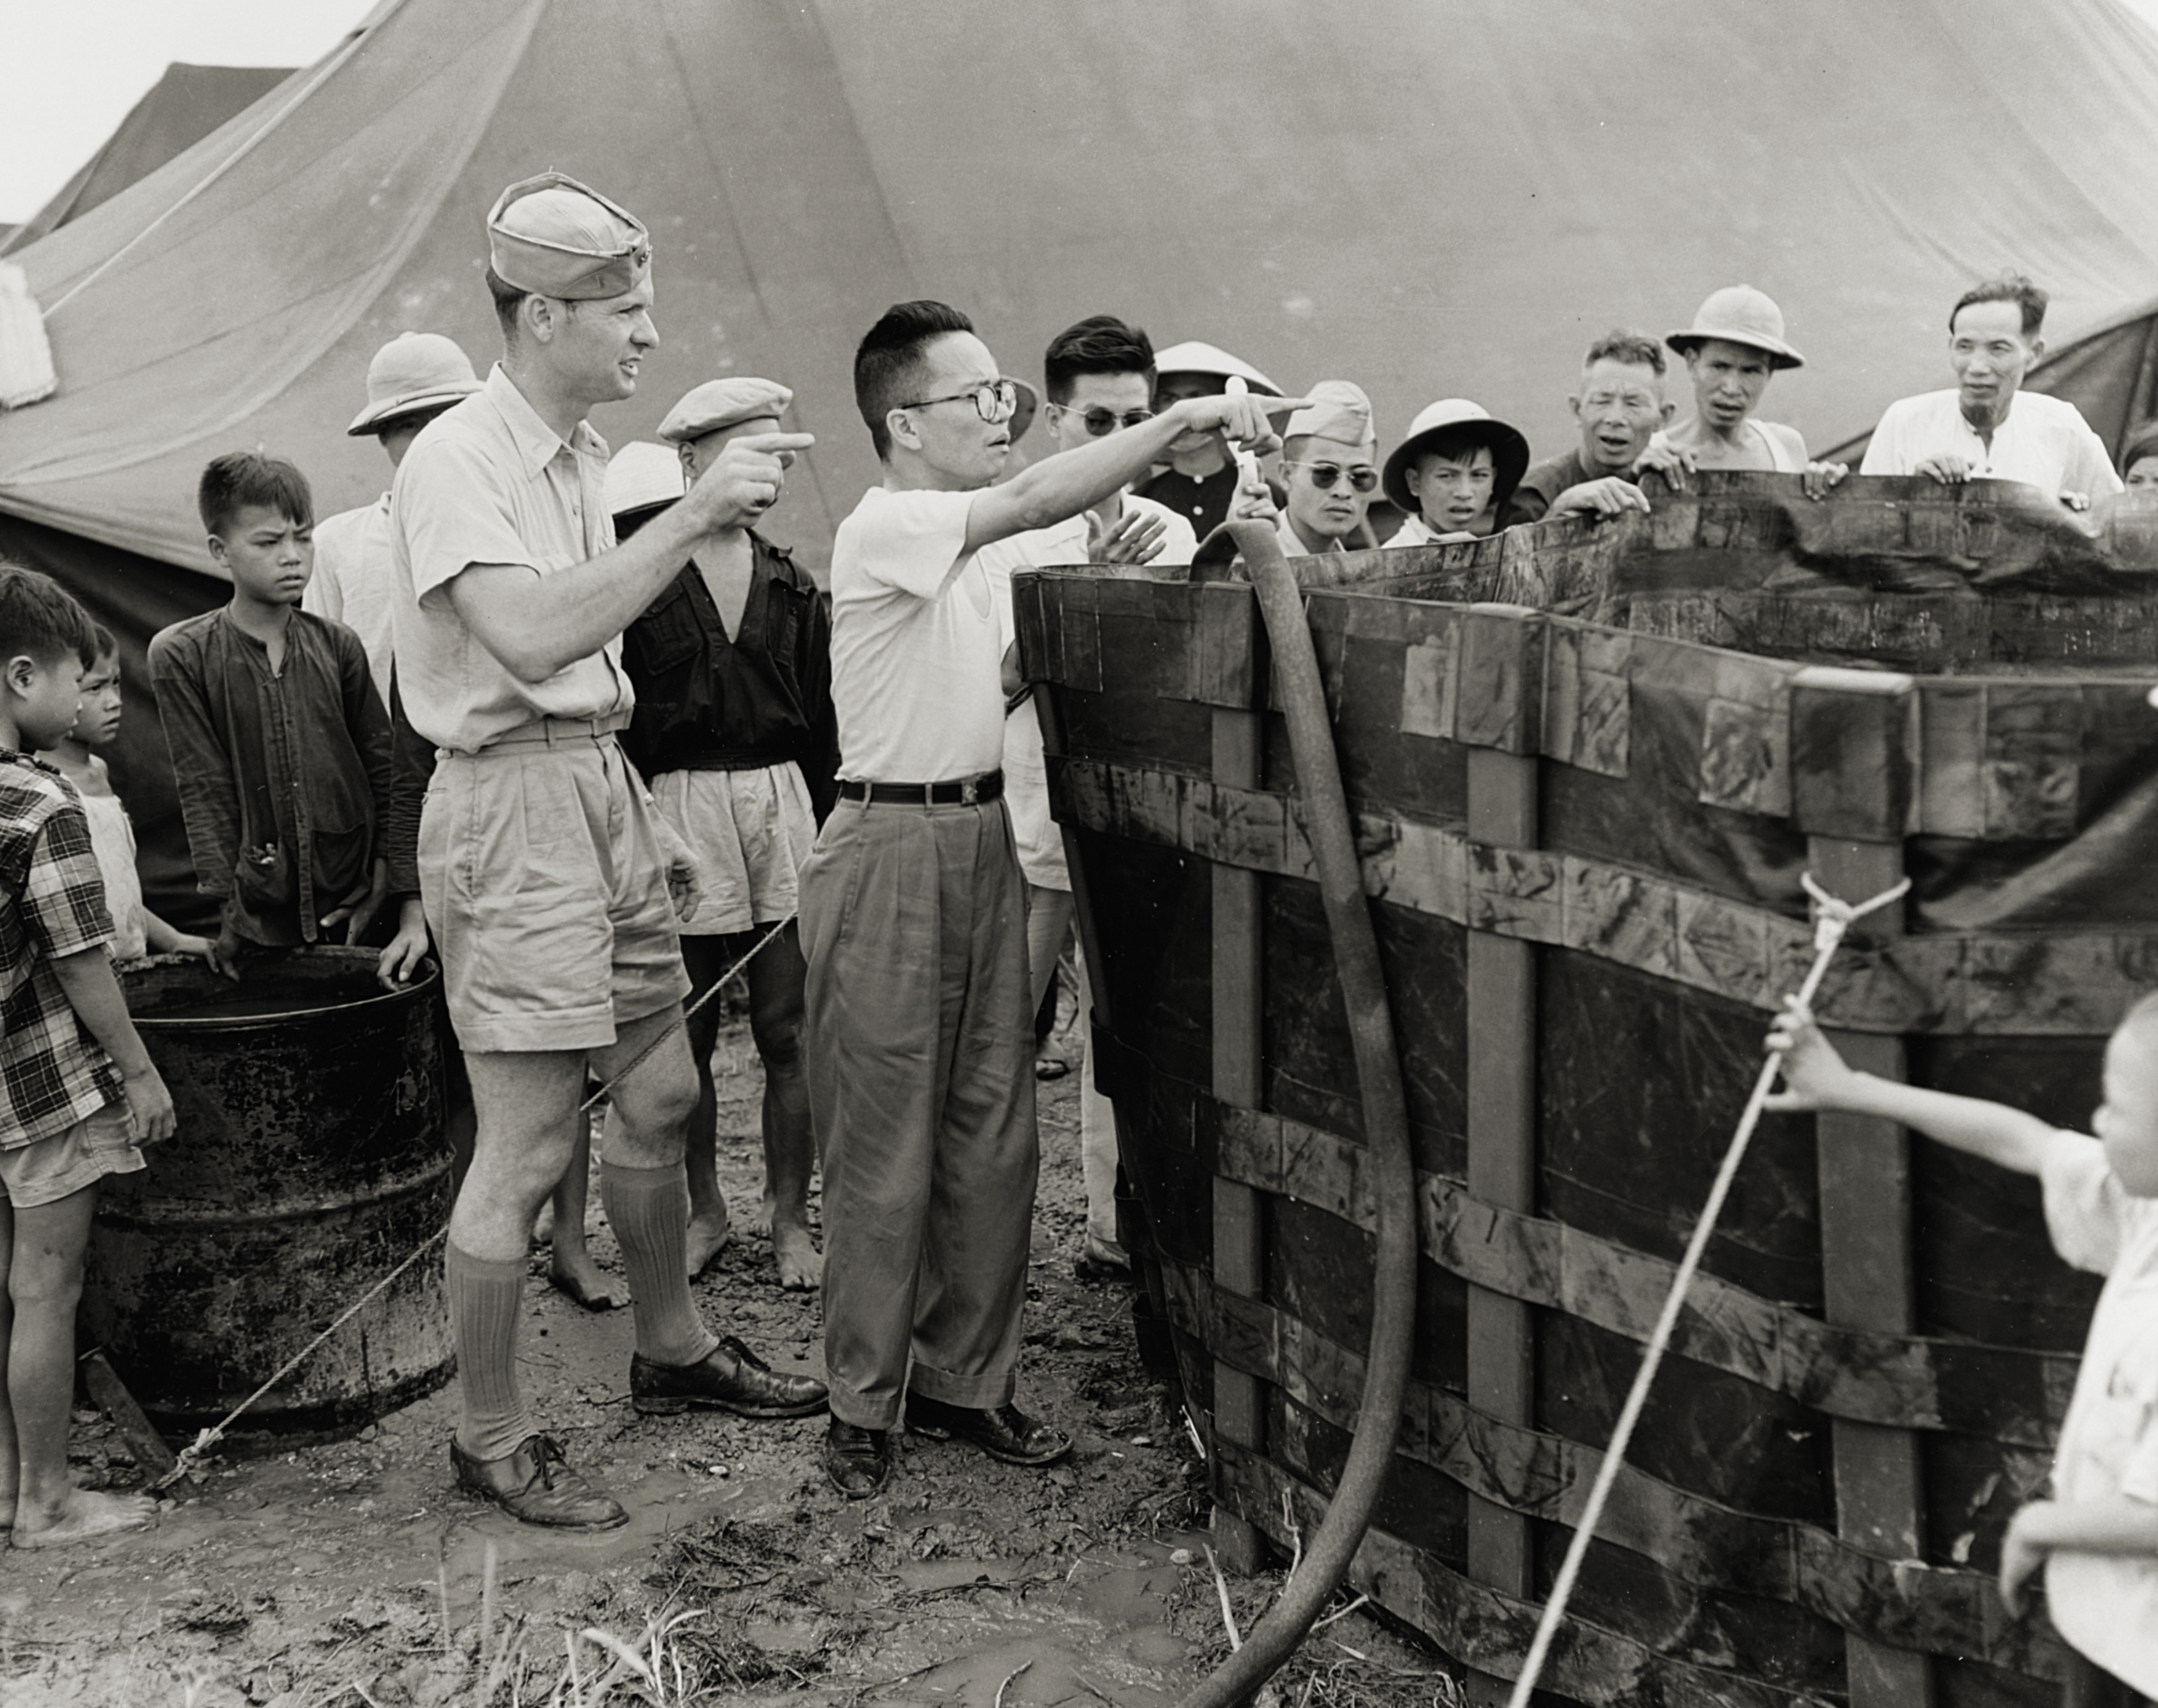 Thomas Dooley, a U.S. Navy doctor, provides instruction on water tanks at a camp in Haiphong, North Vietnam. / US Navy